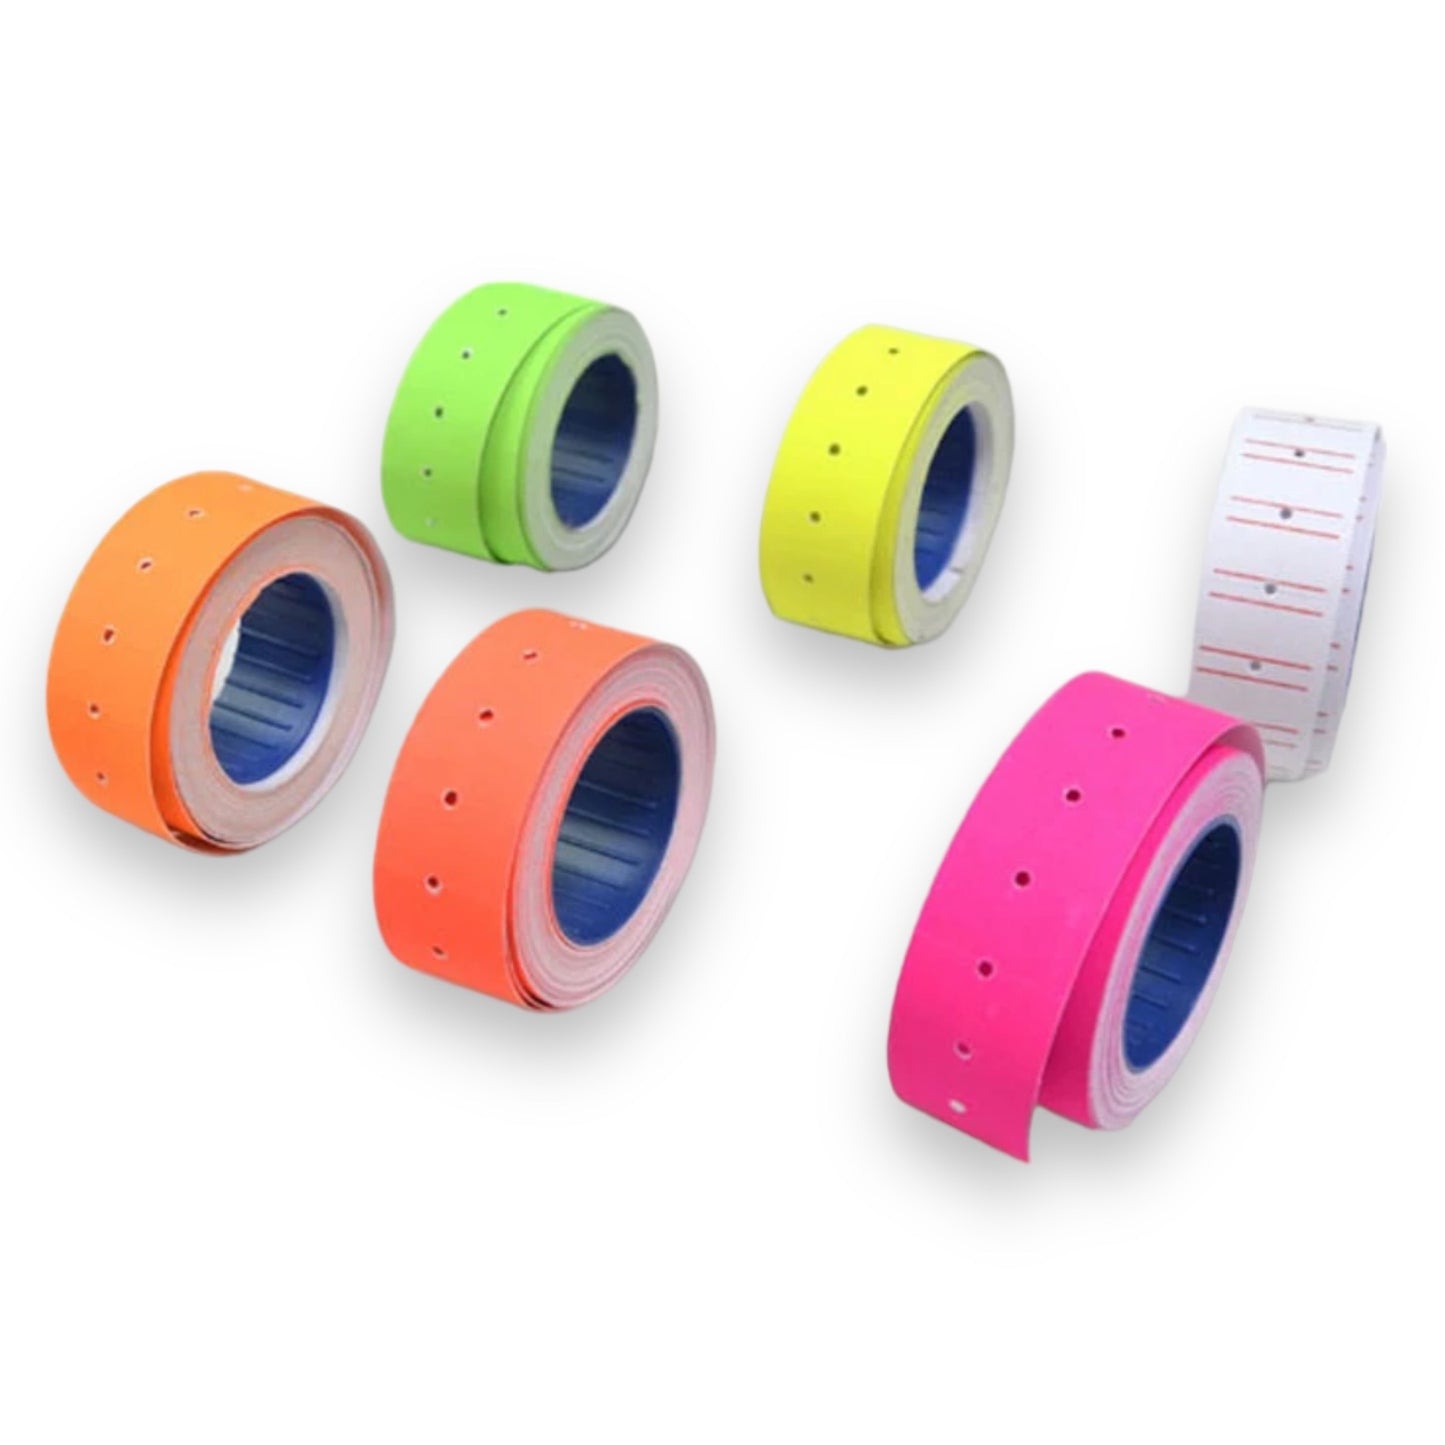 Timmy Toys - MK006 - 5000 Labels or 50.000 Labels - 6 Colours - 1 Piece